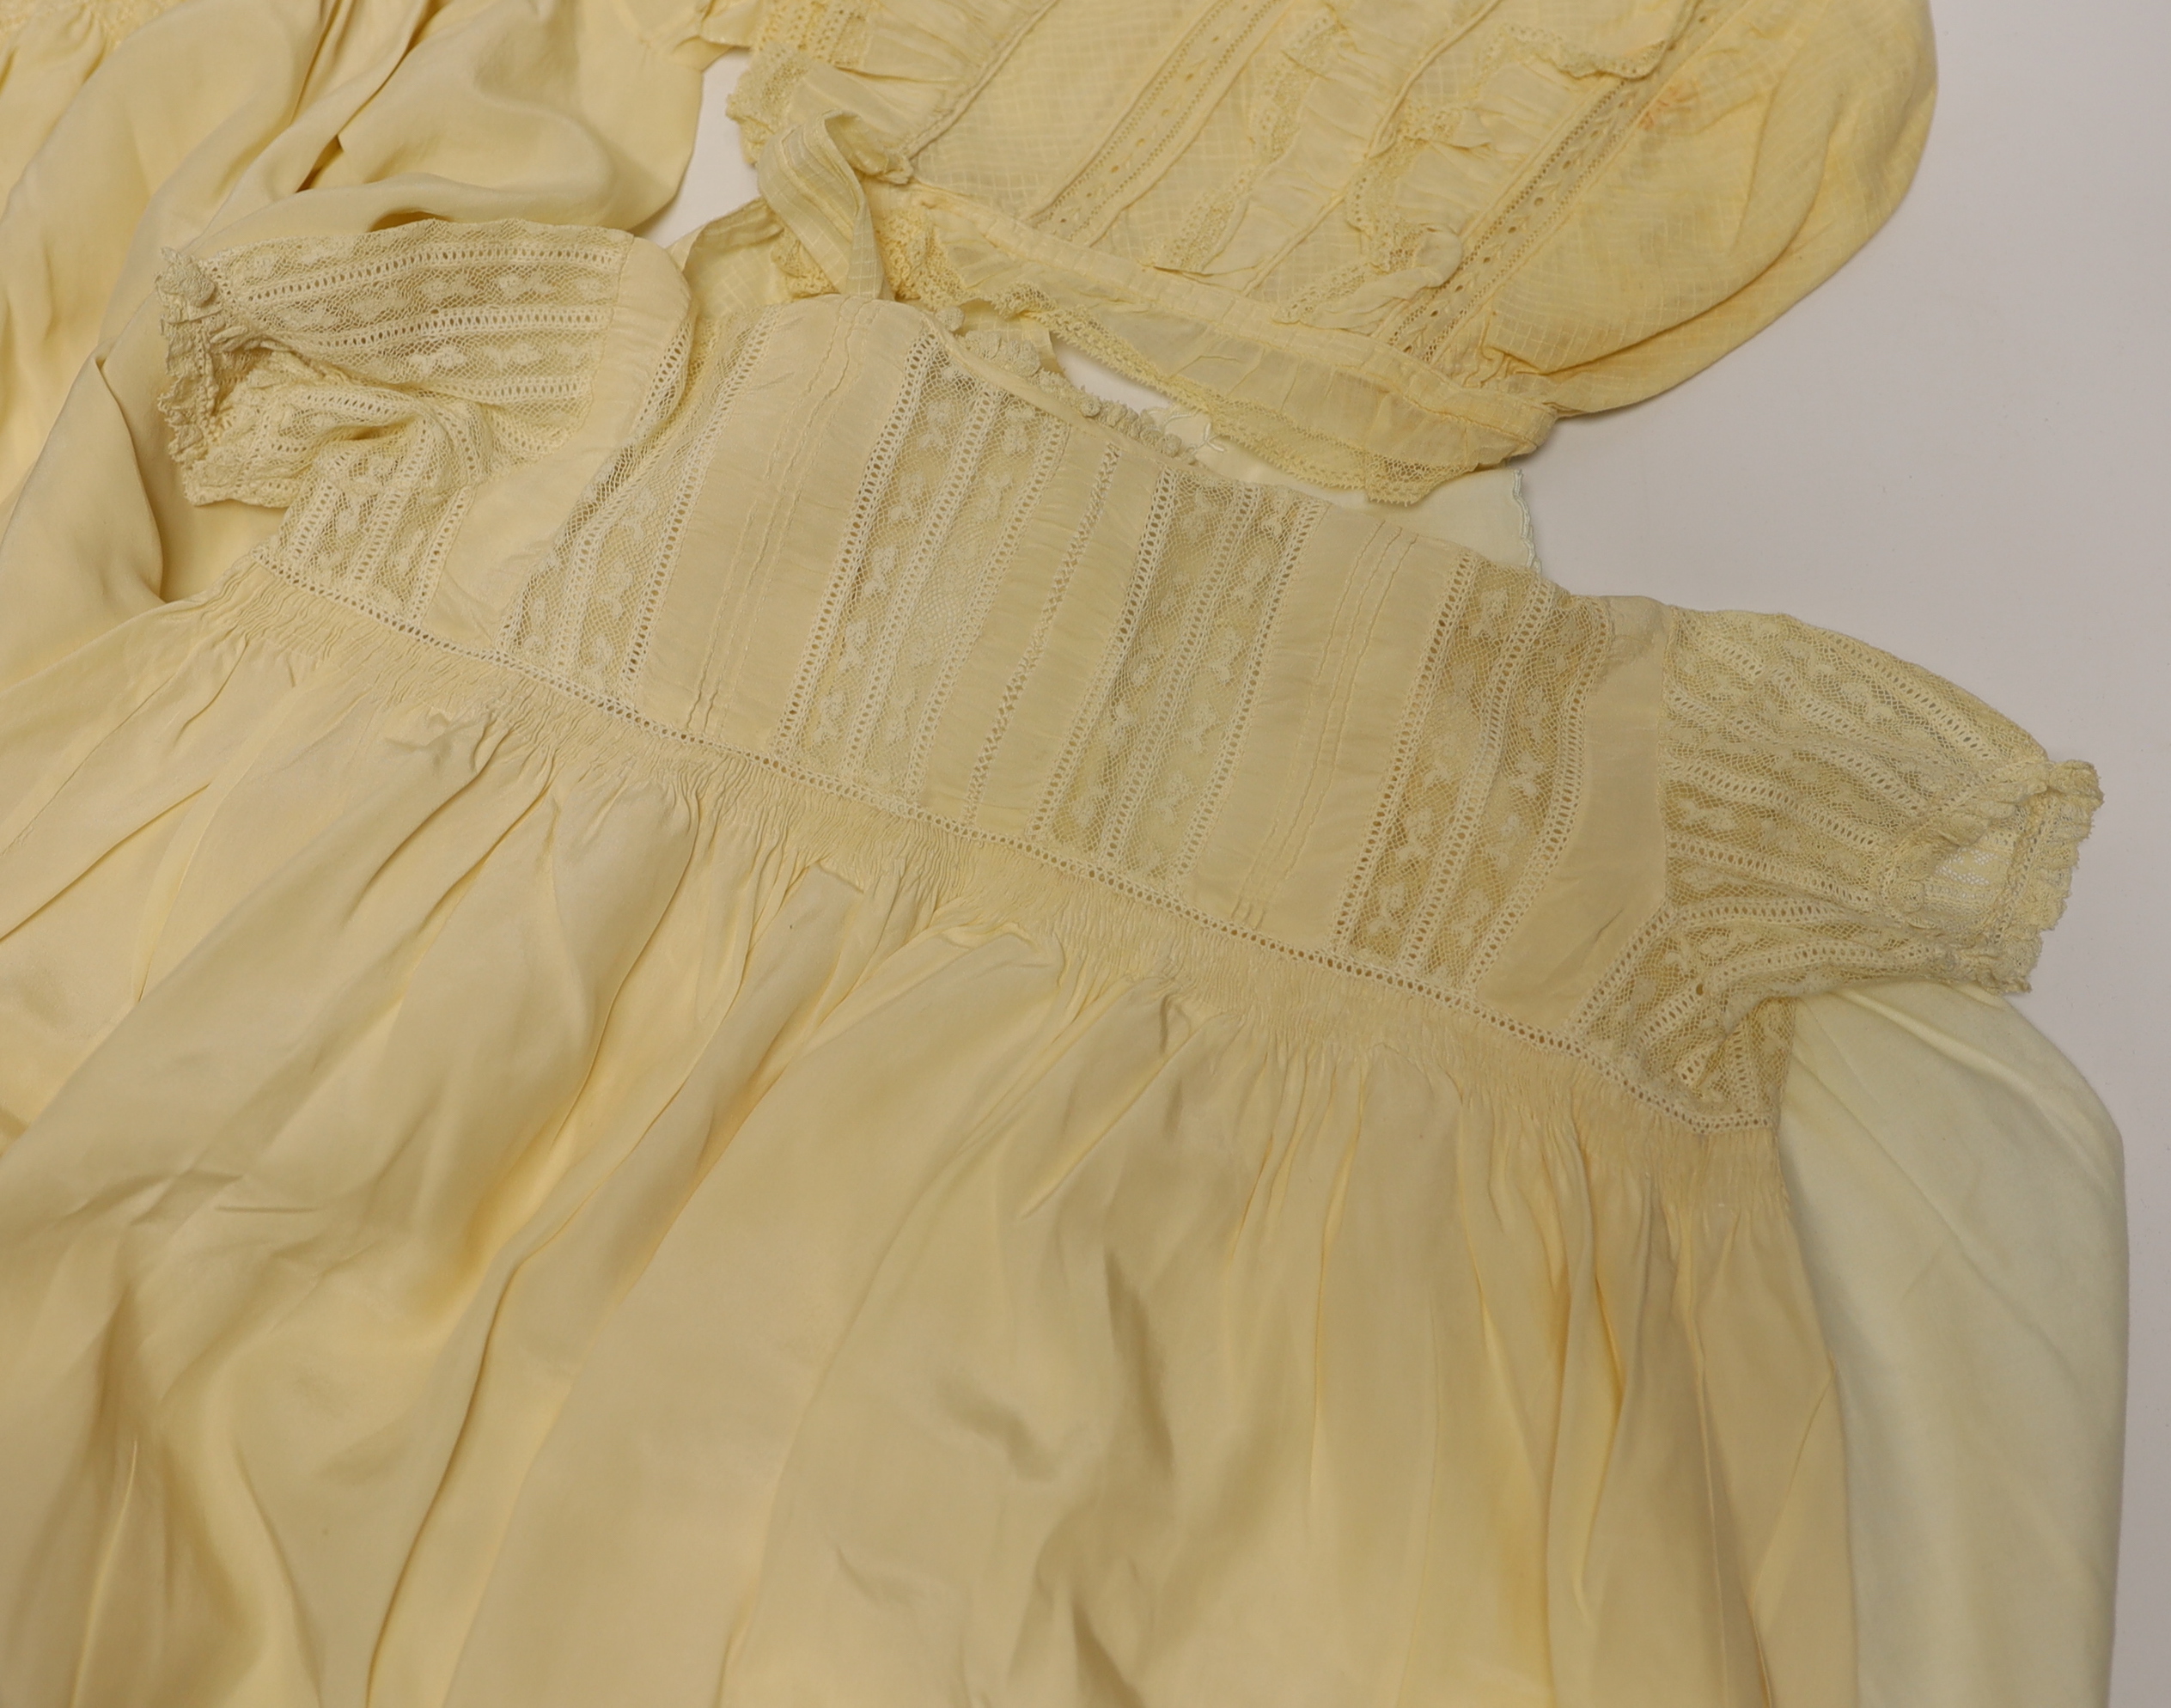 Two 19th century silk baby gowns, a ladies lace trimmed bonnet, a black satin and lace maids apron, various tatting tape lace and other table mats, etc.